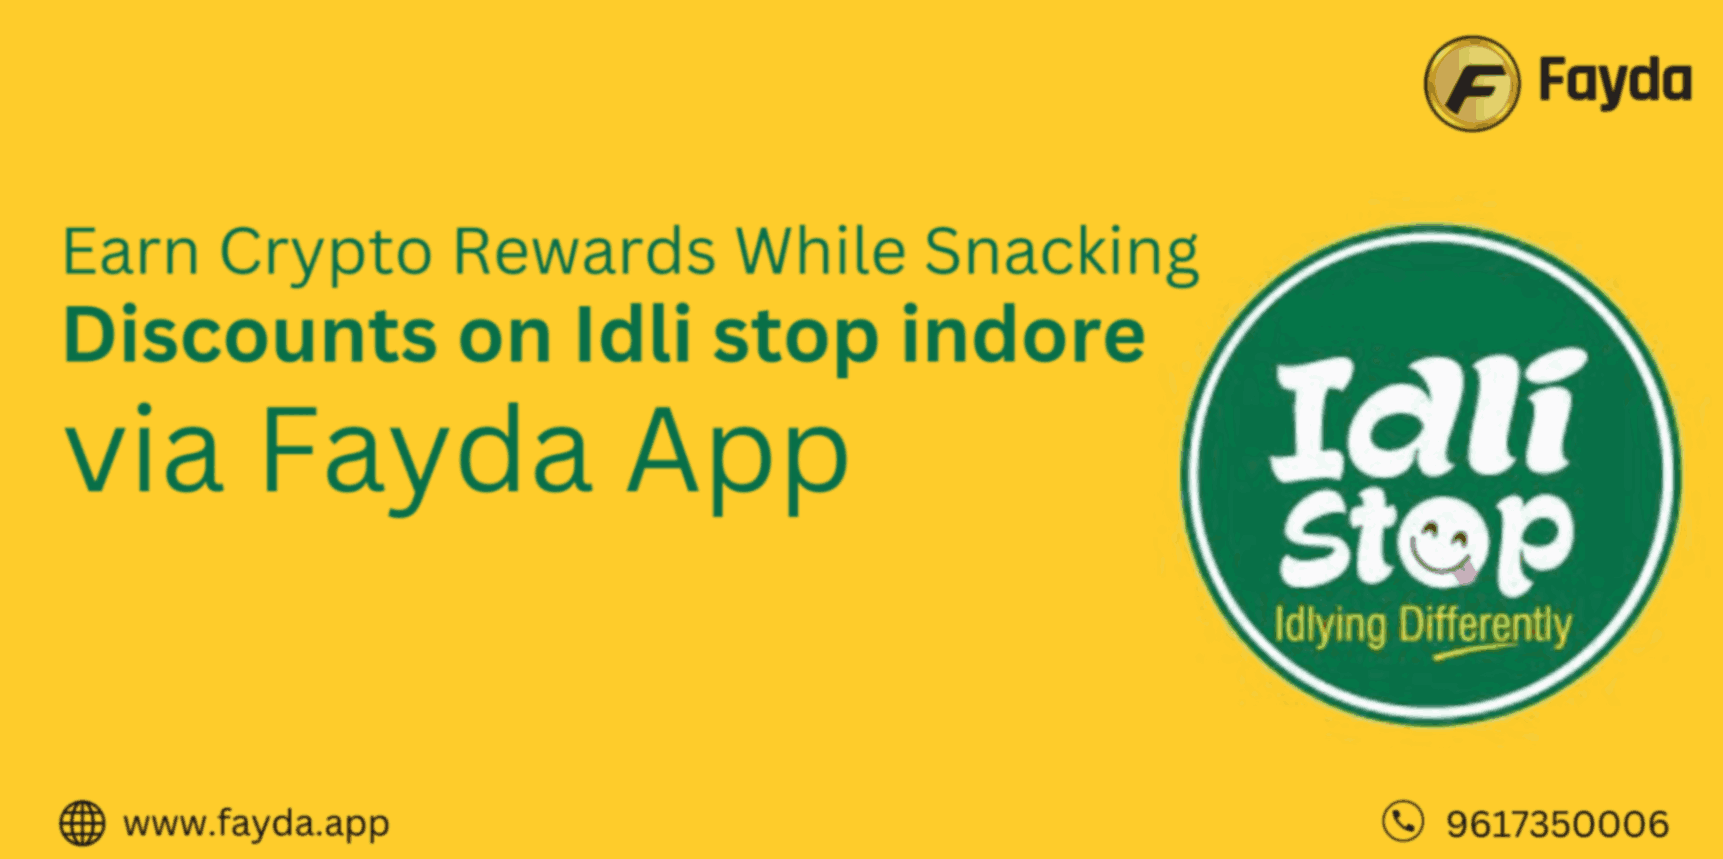 Earn Crypto Rewards While Snacking: Discounts on Idli stop indore via Fayda App